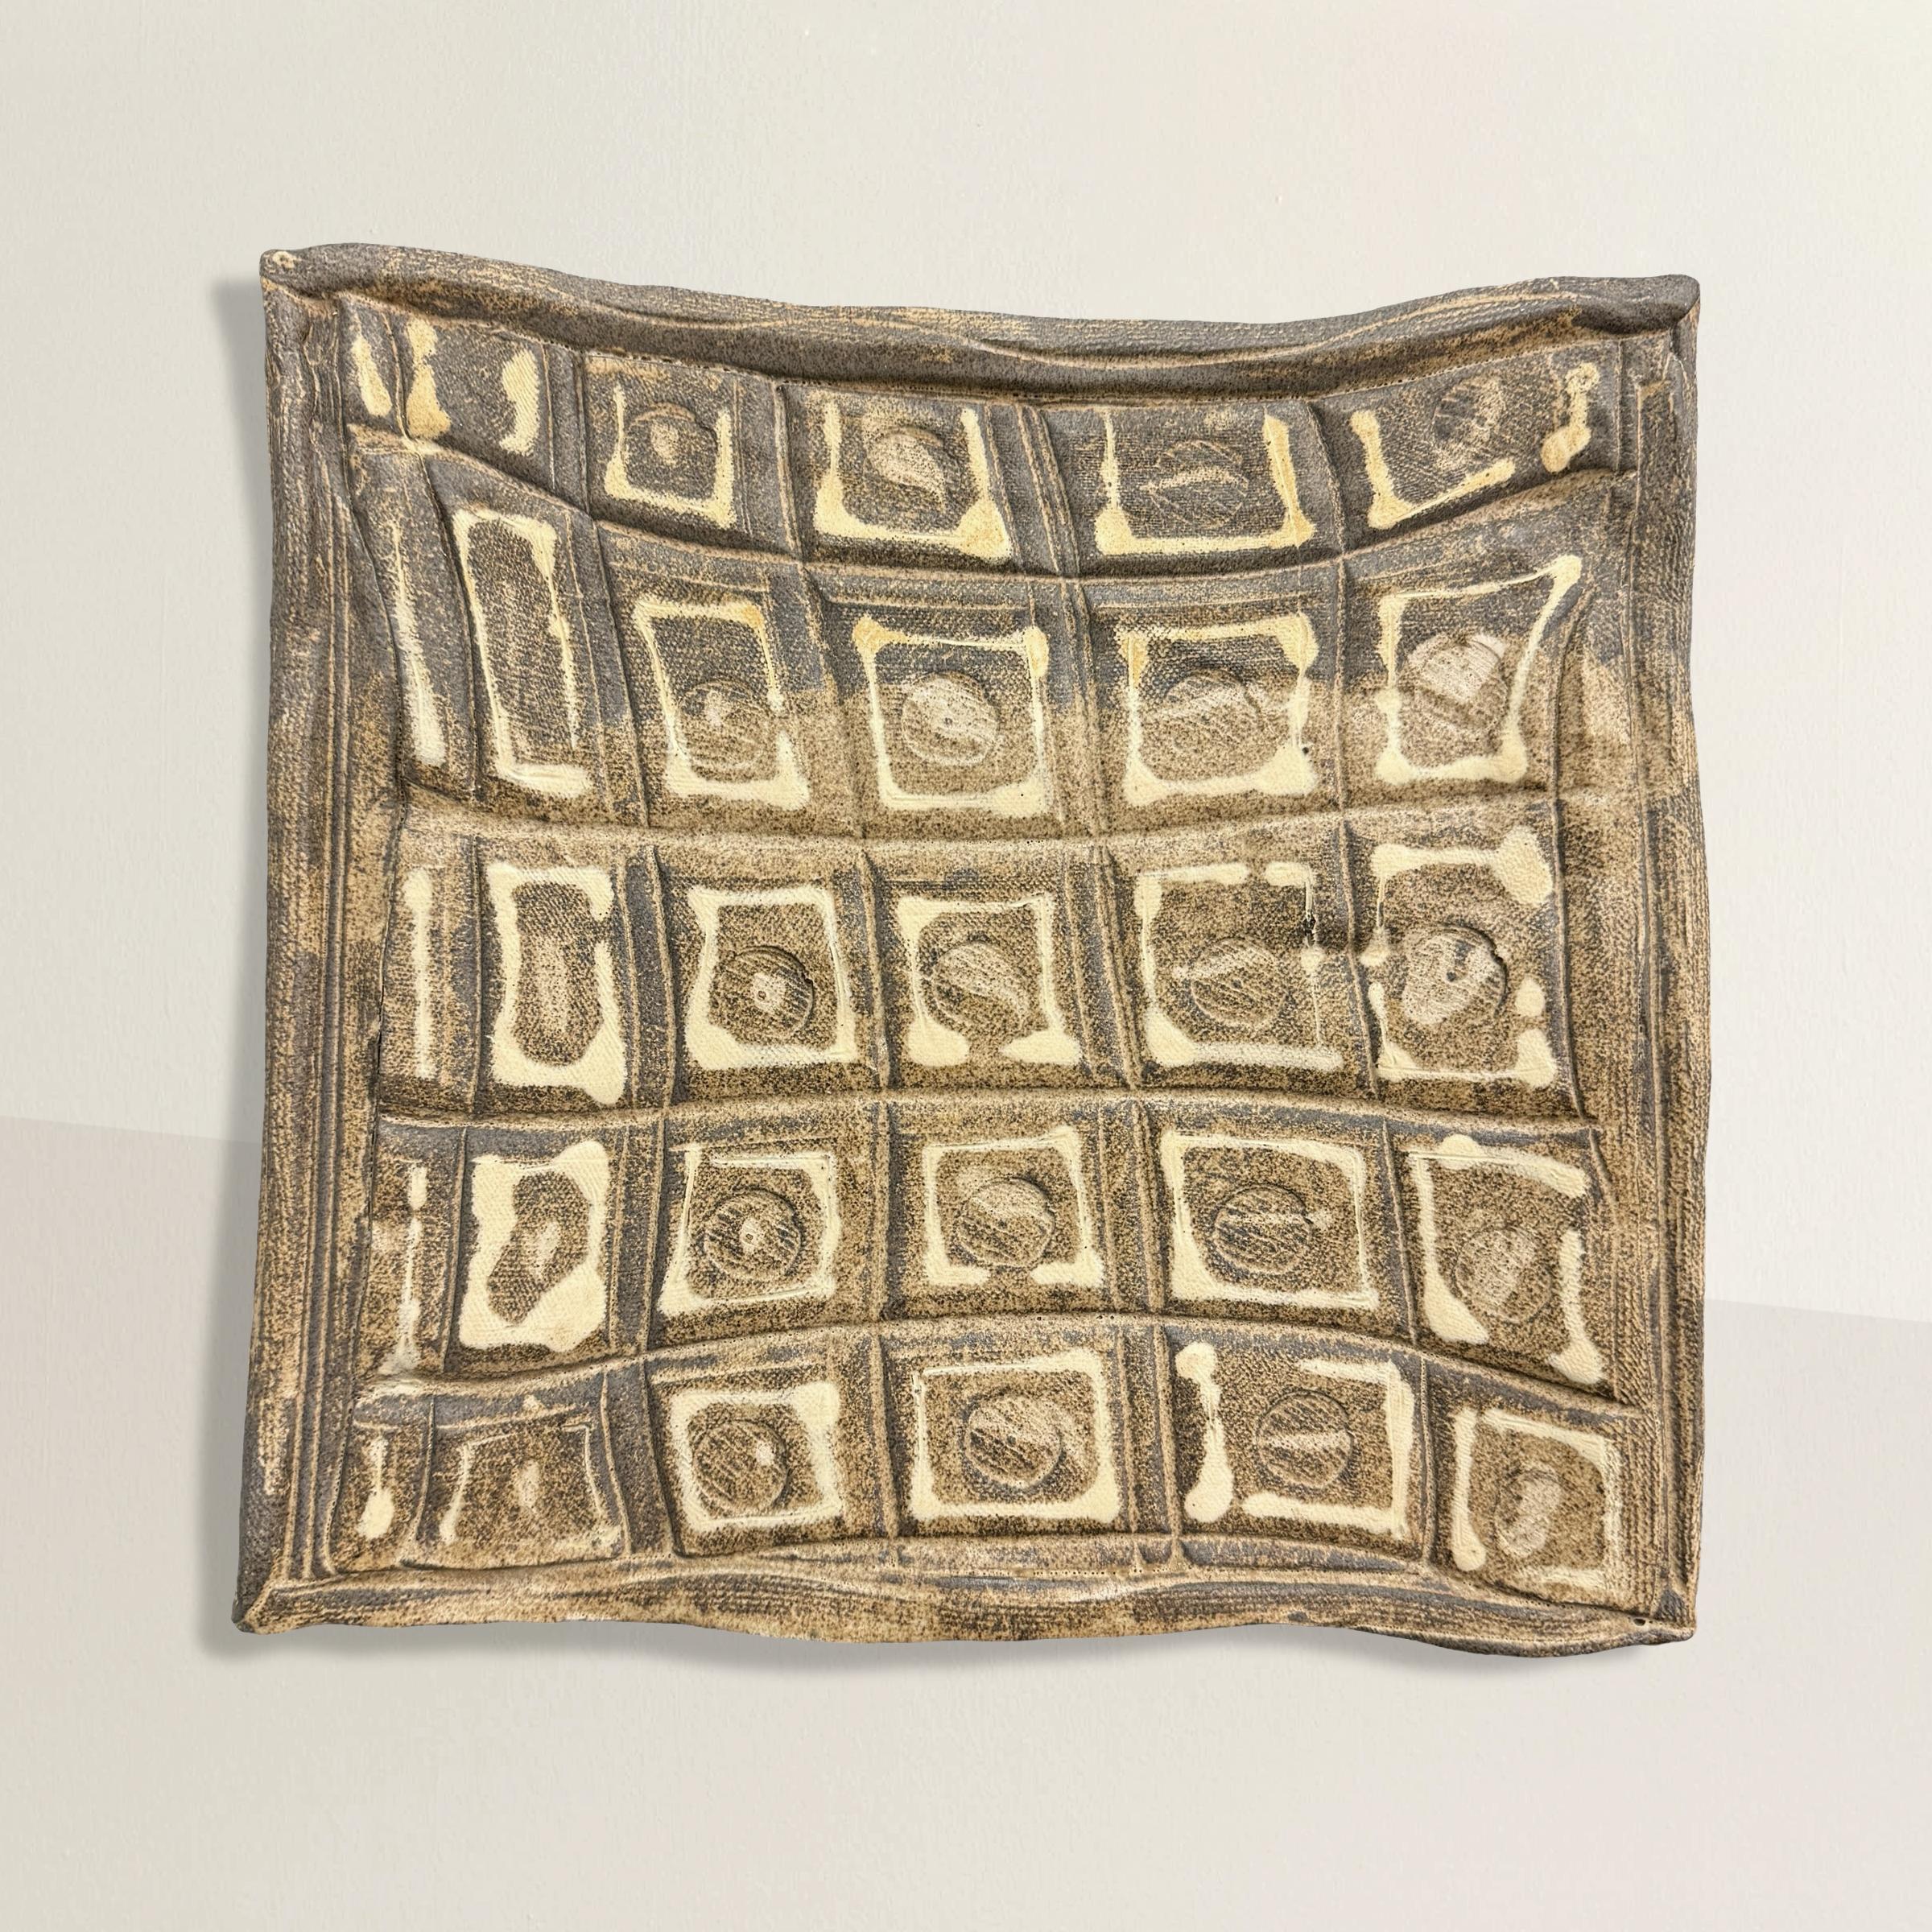 This late 20th-century American hand-built slab ceramic tray is a striking fusion of artistic craftsmanship and practical utility. Its undulating edges add a touch of organic elegance, drawing the eye to the intricate pattern of repeated unique